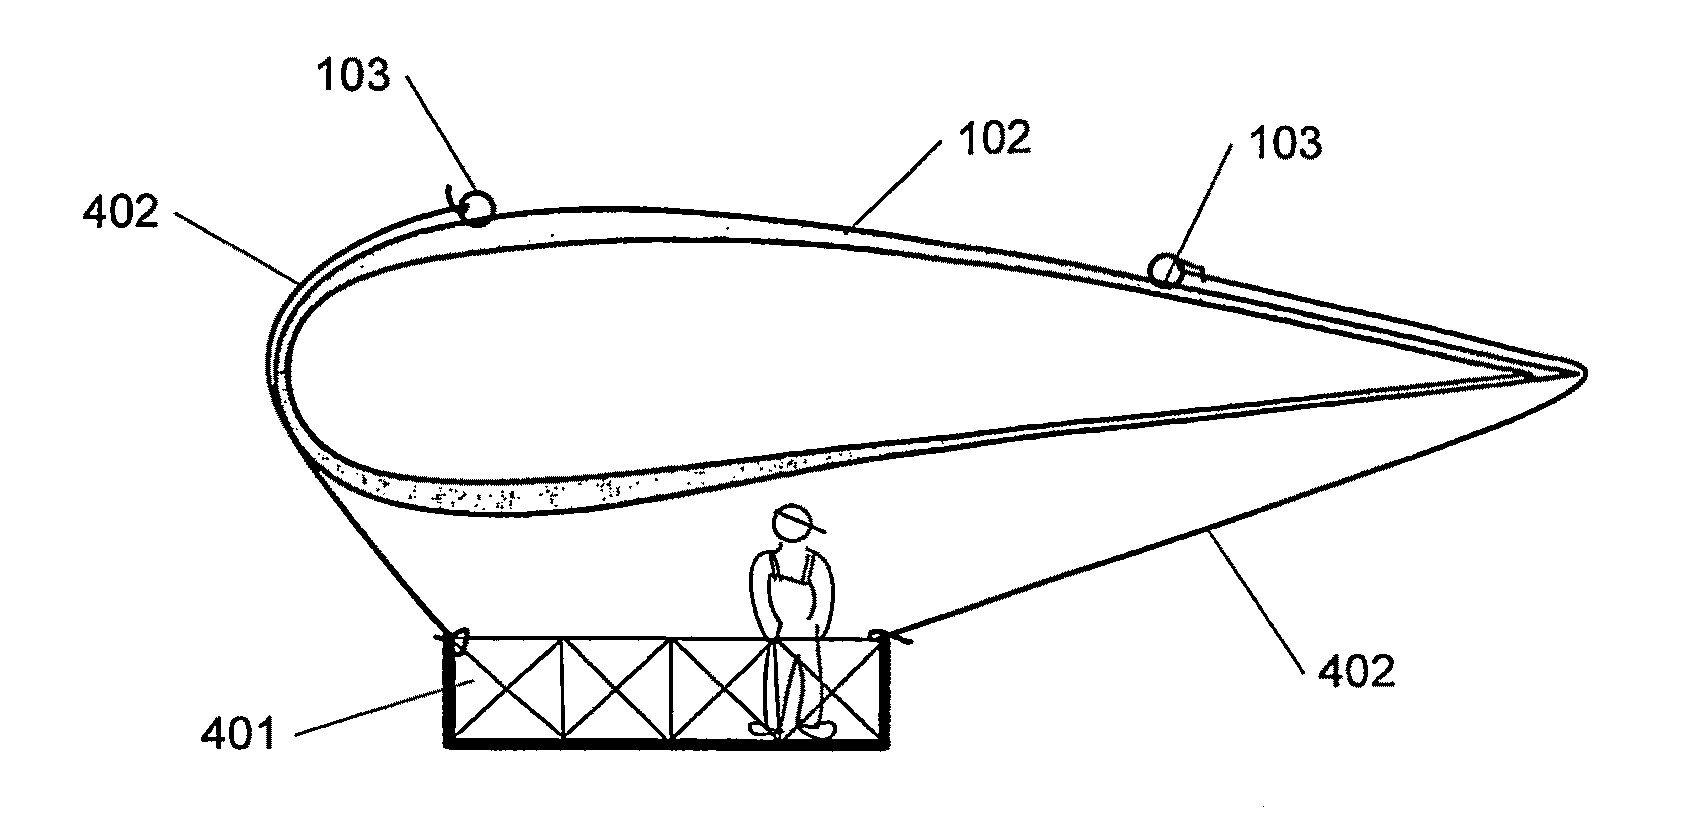 Attachment Devices on a Wind Turbine Blade and a Method of Servicing Utilising these Device